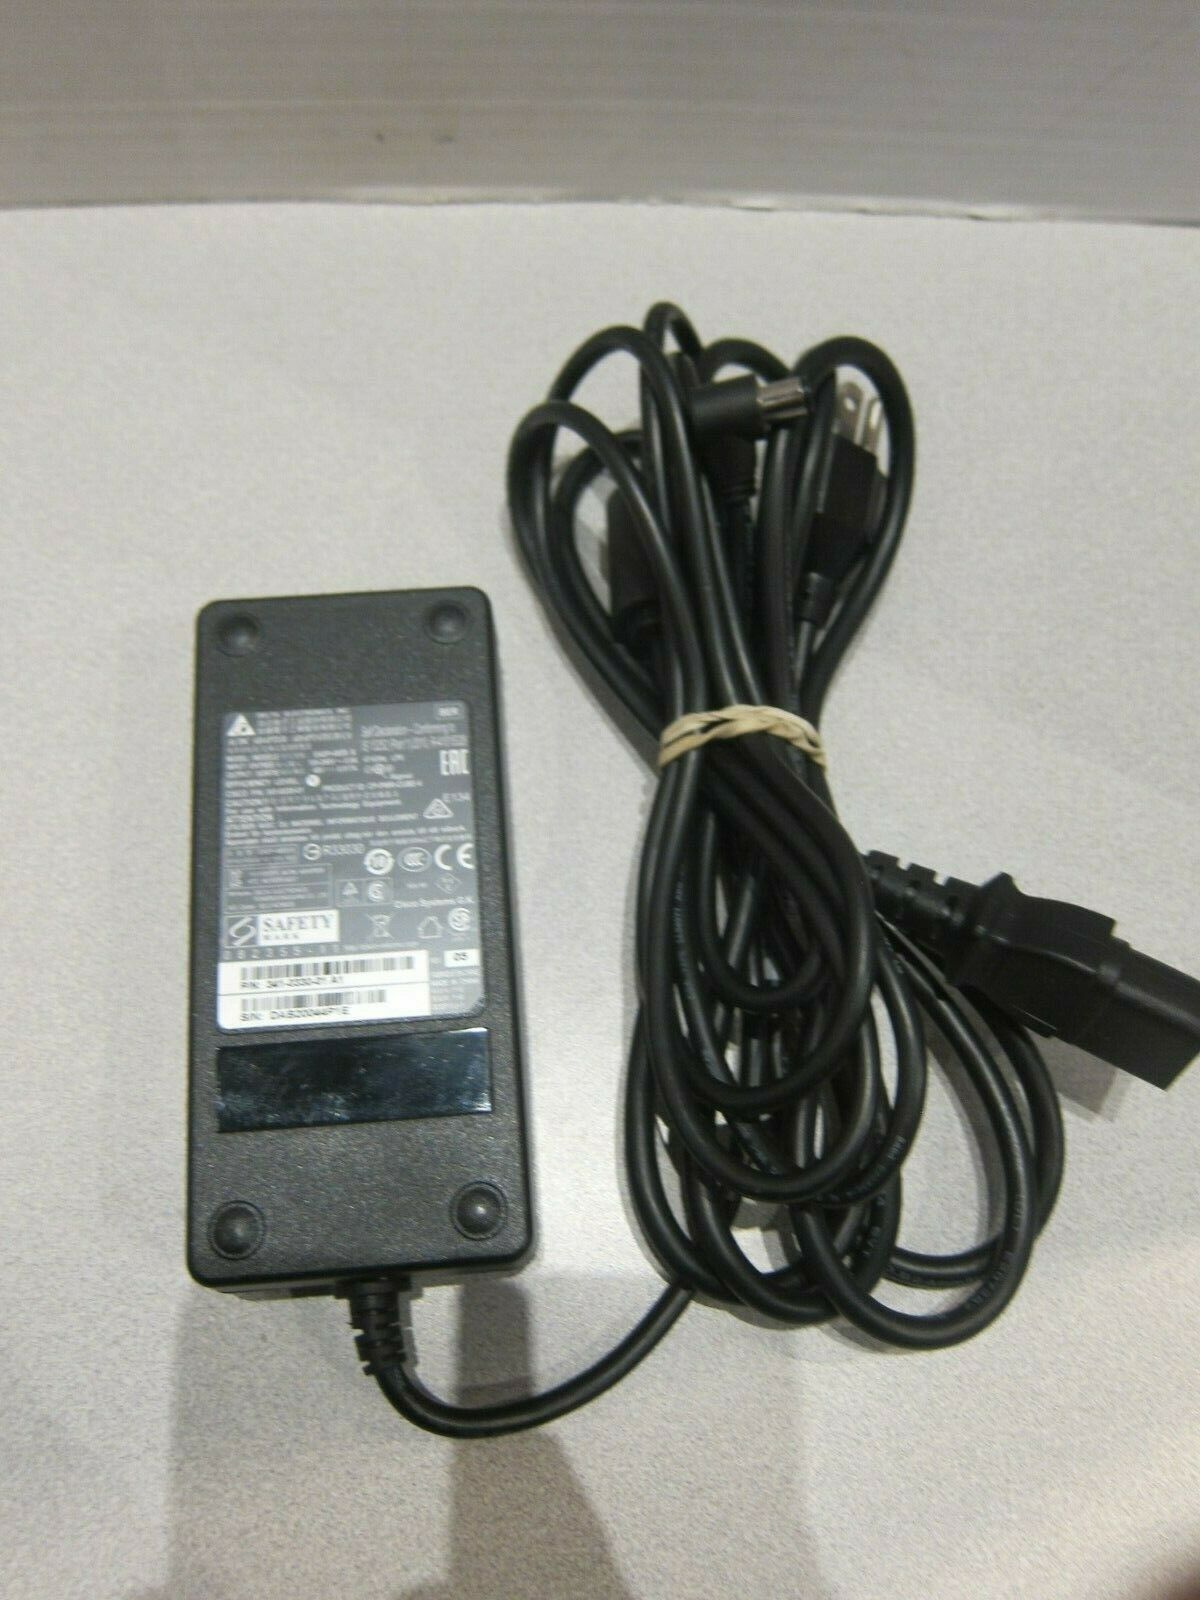 NEW 48V 0.917A 341-0330-01 Delta EADP-48EB B power adapter for 8900 9900 8961 9951 9971 IP phone